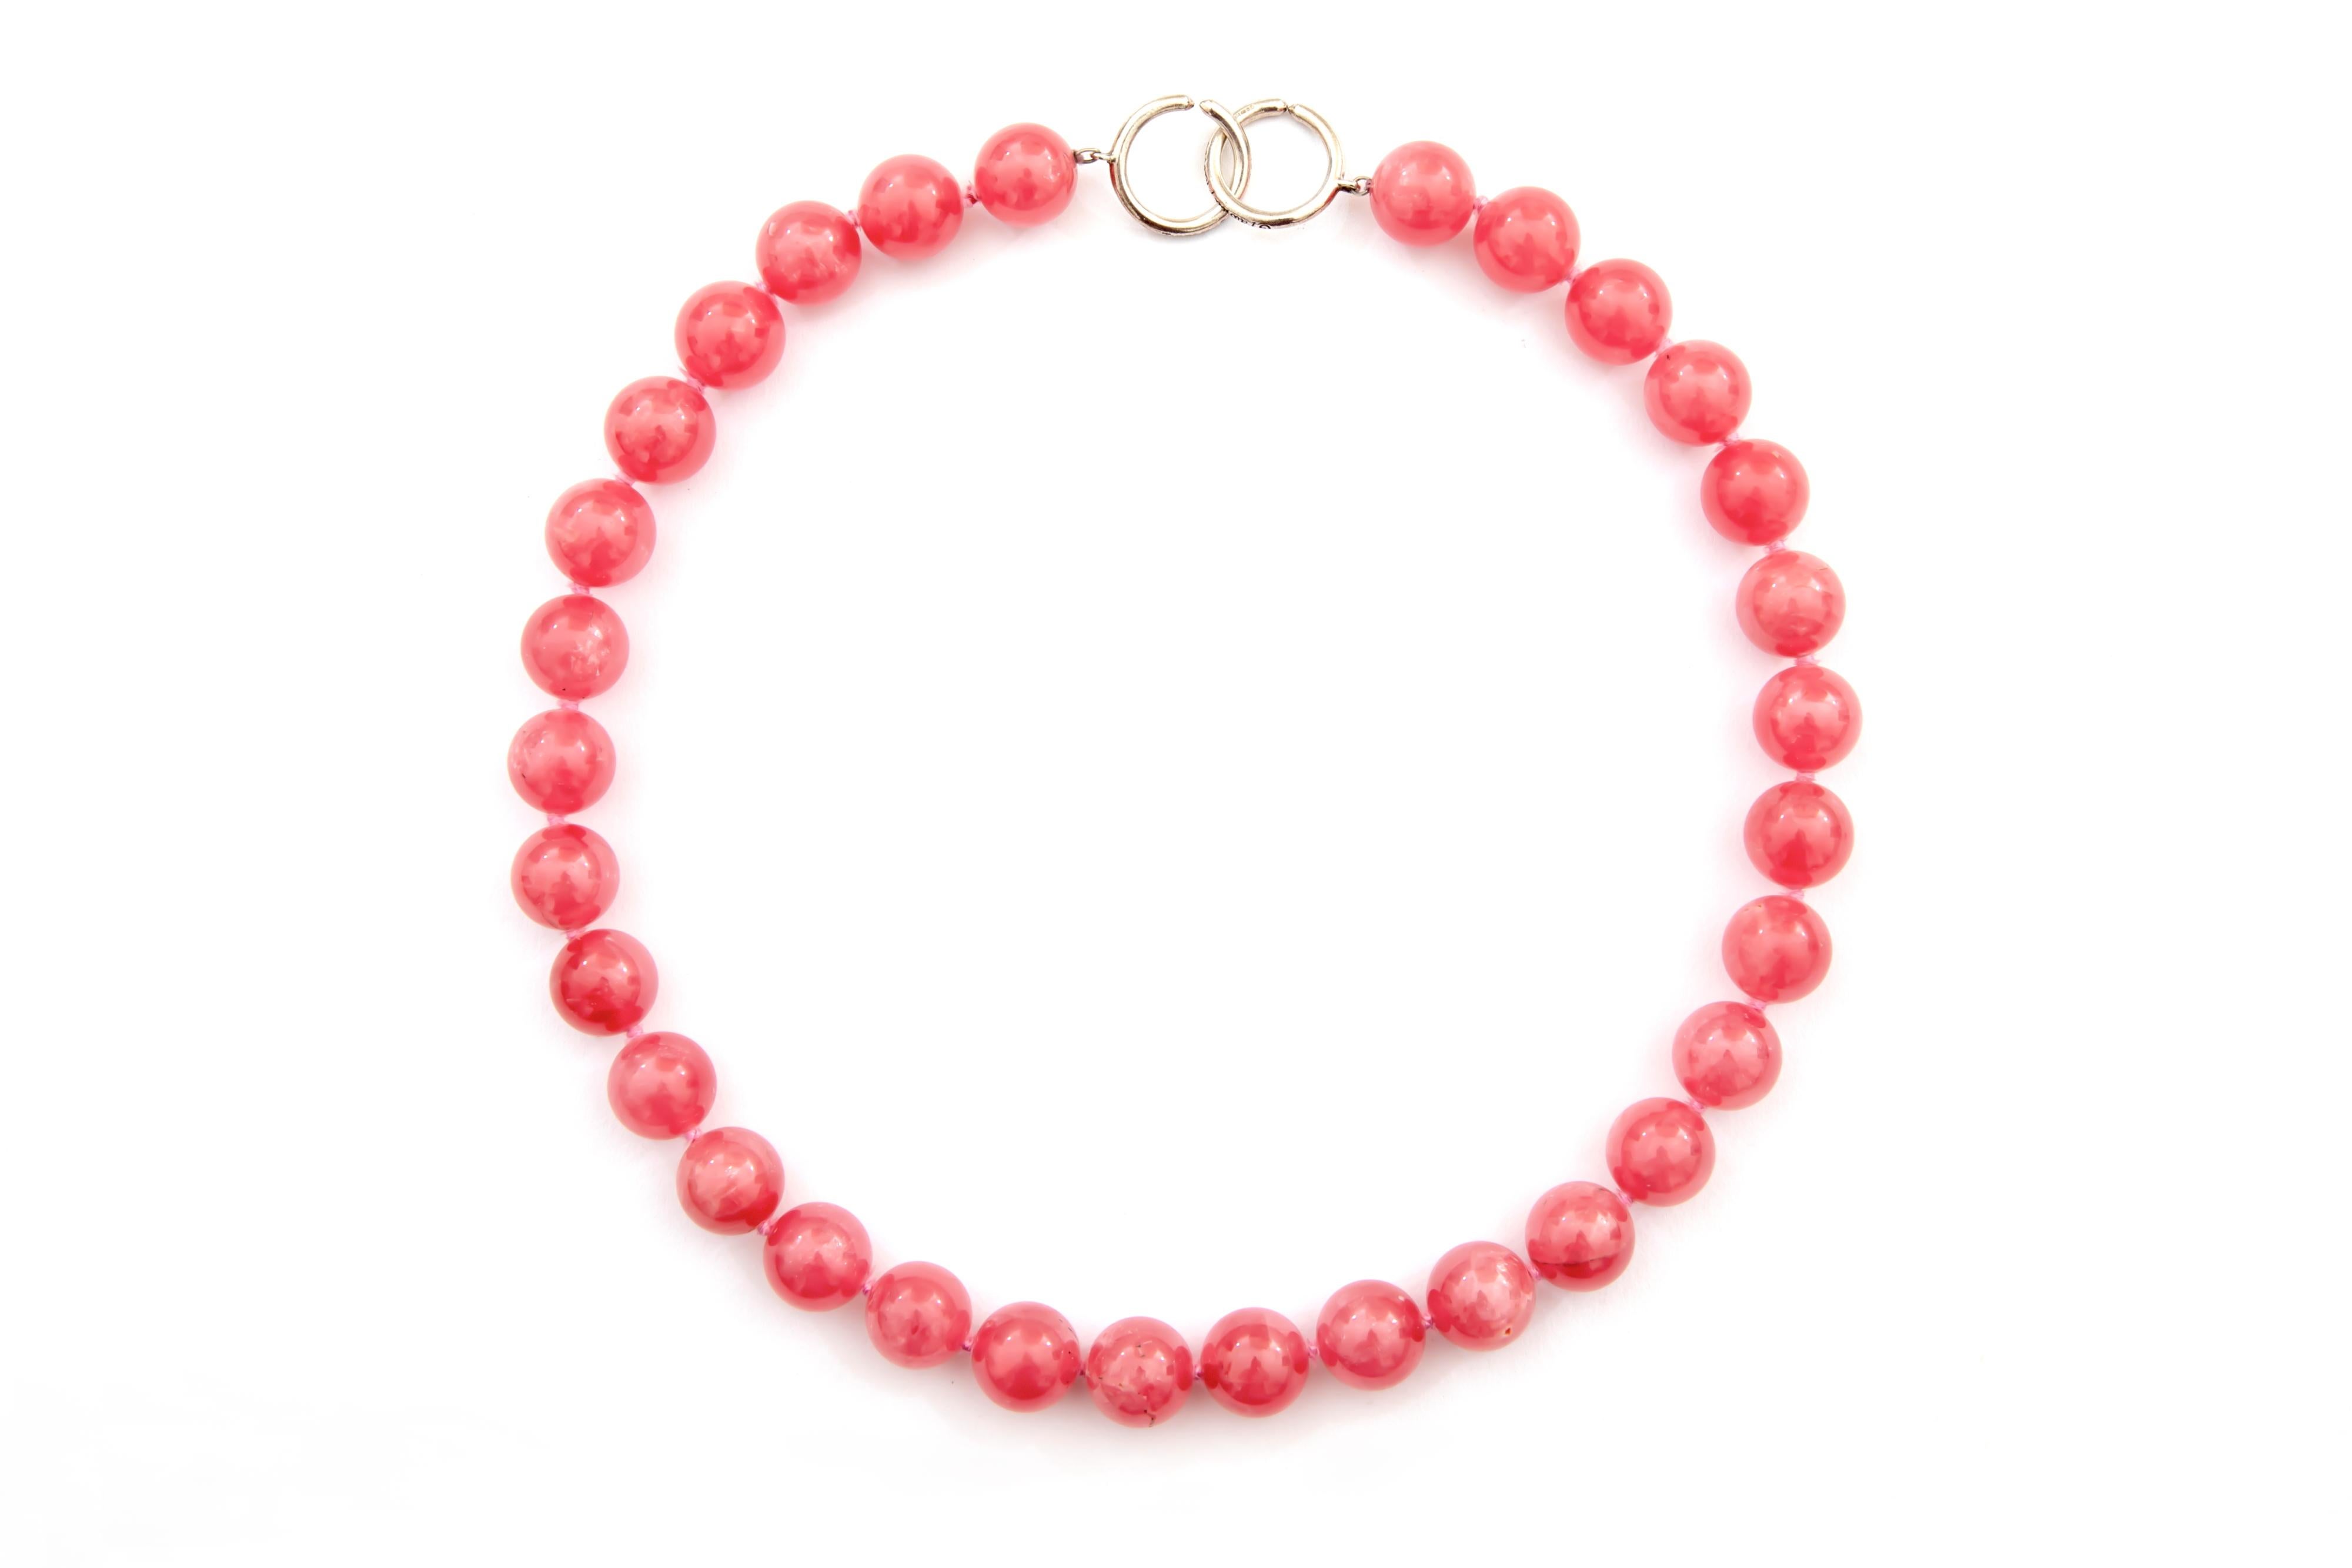 Women's Paloma Picasso for Tiffany & Co. Silver Rhodochrosite Pink Bead Necklace